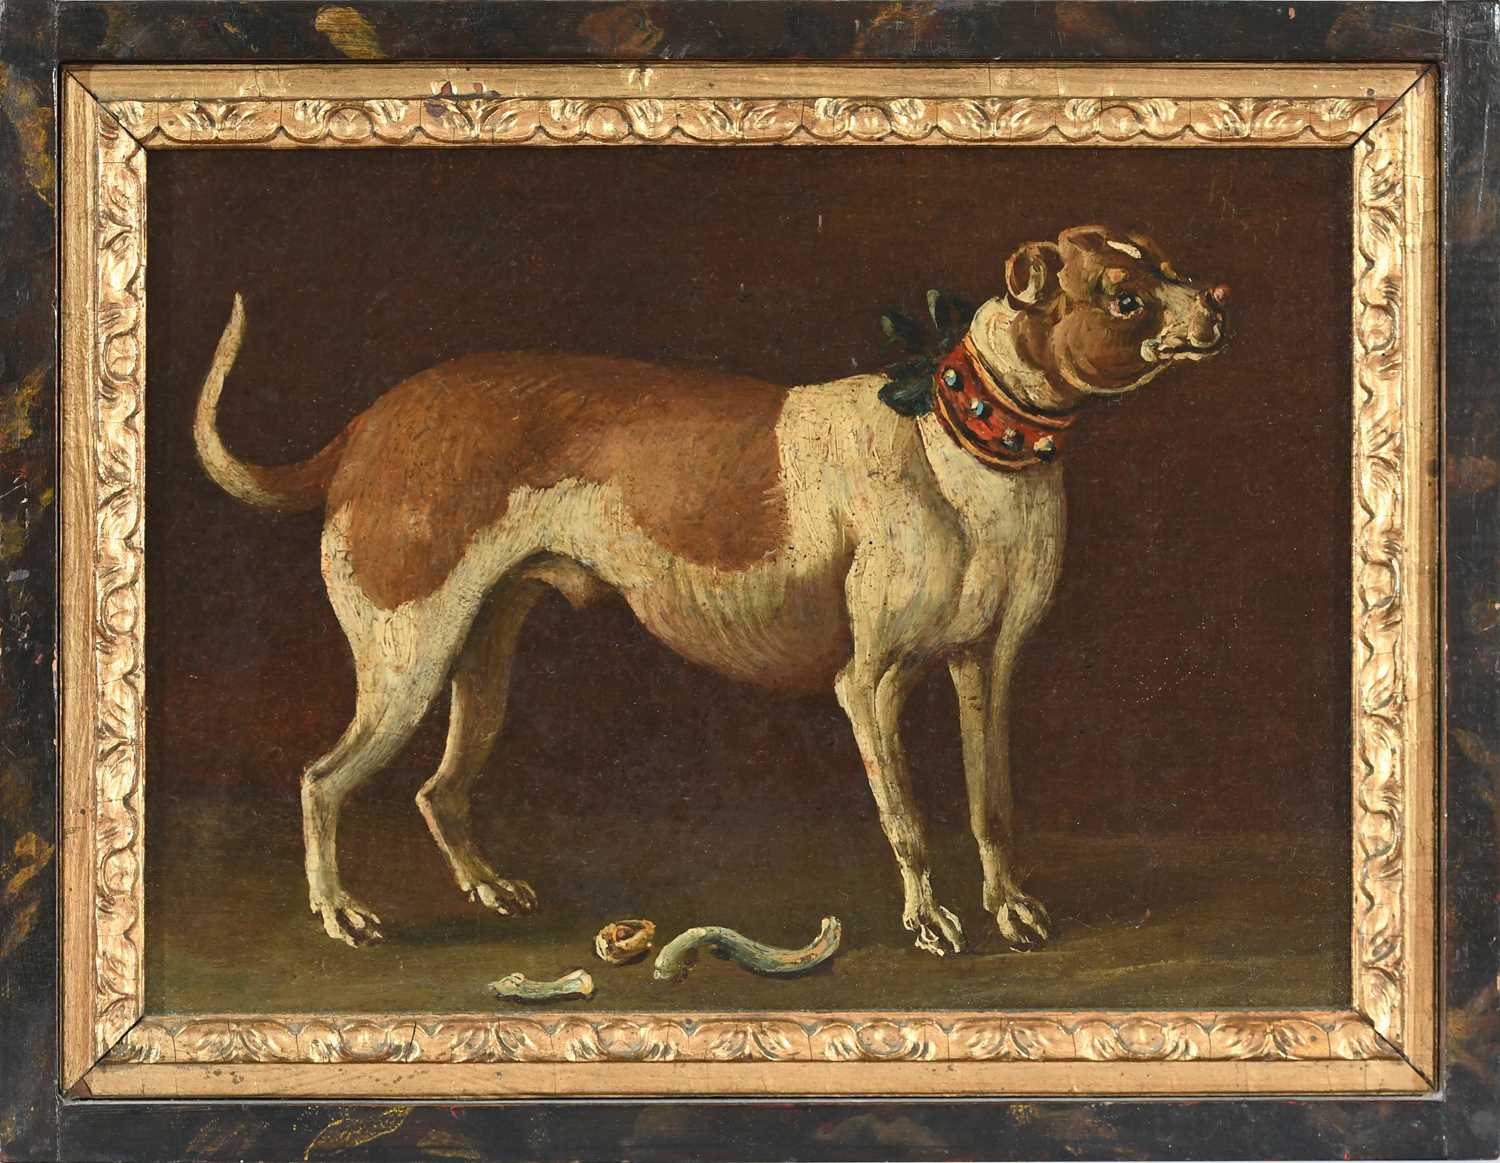 ITALIAN SCHOOL LATE 18TH / EARLY 19TH CENTURY Portrait of a pug with a red collar, Portrait of a pug